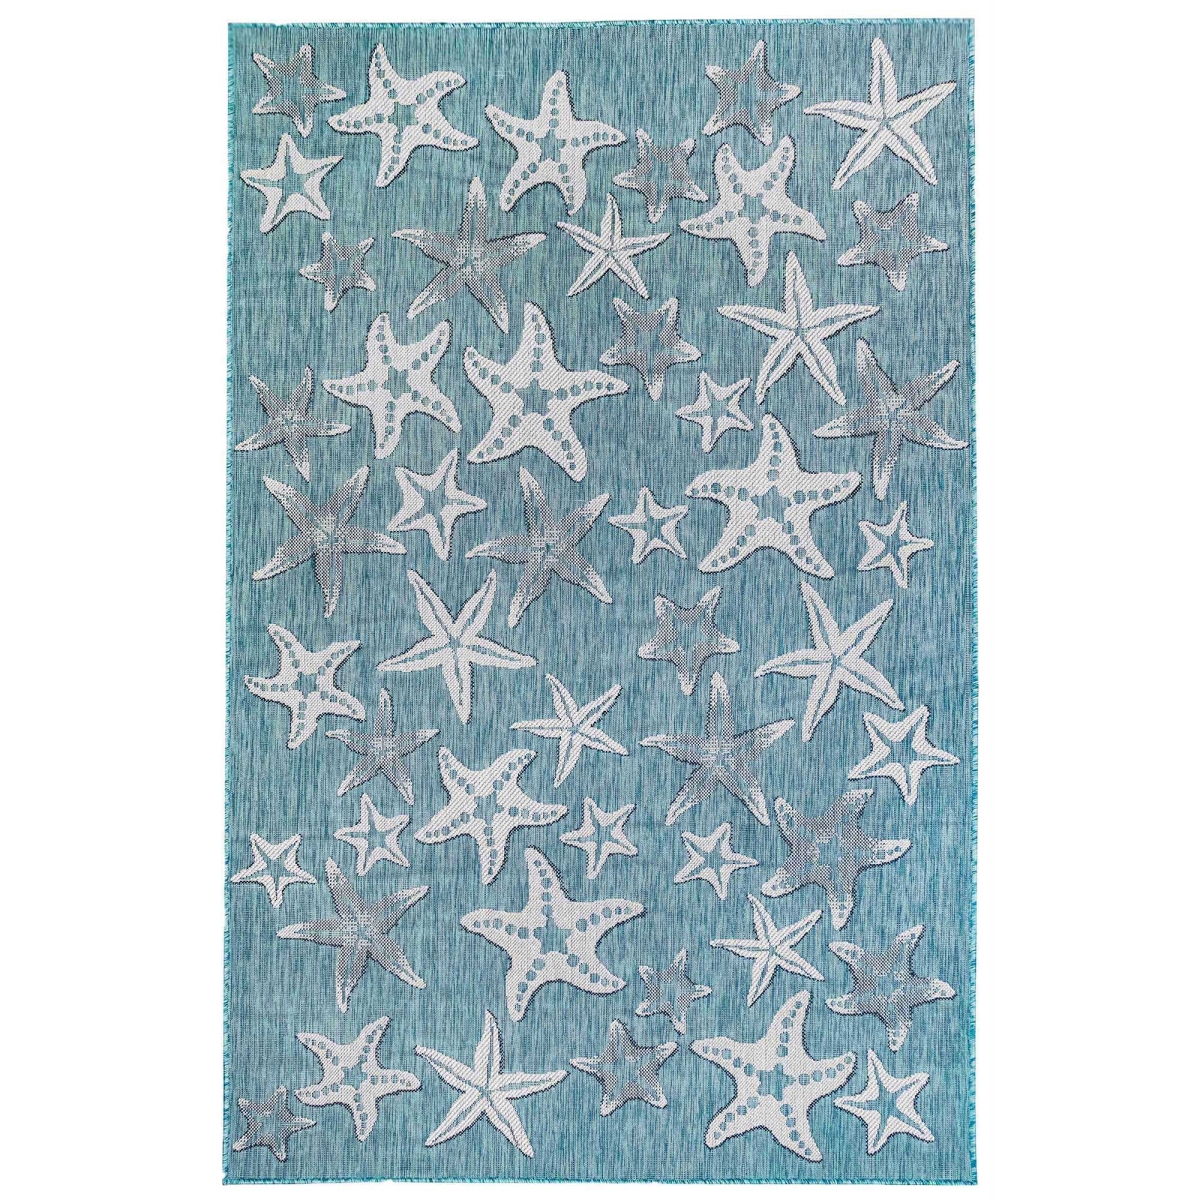 Trans-ocean Imports Cre45841504 39 In. X 59 In. Liora Manne Carmel Starfish Indoor & Outdoor Wilton Woven Rectangle Rug - Aqua